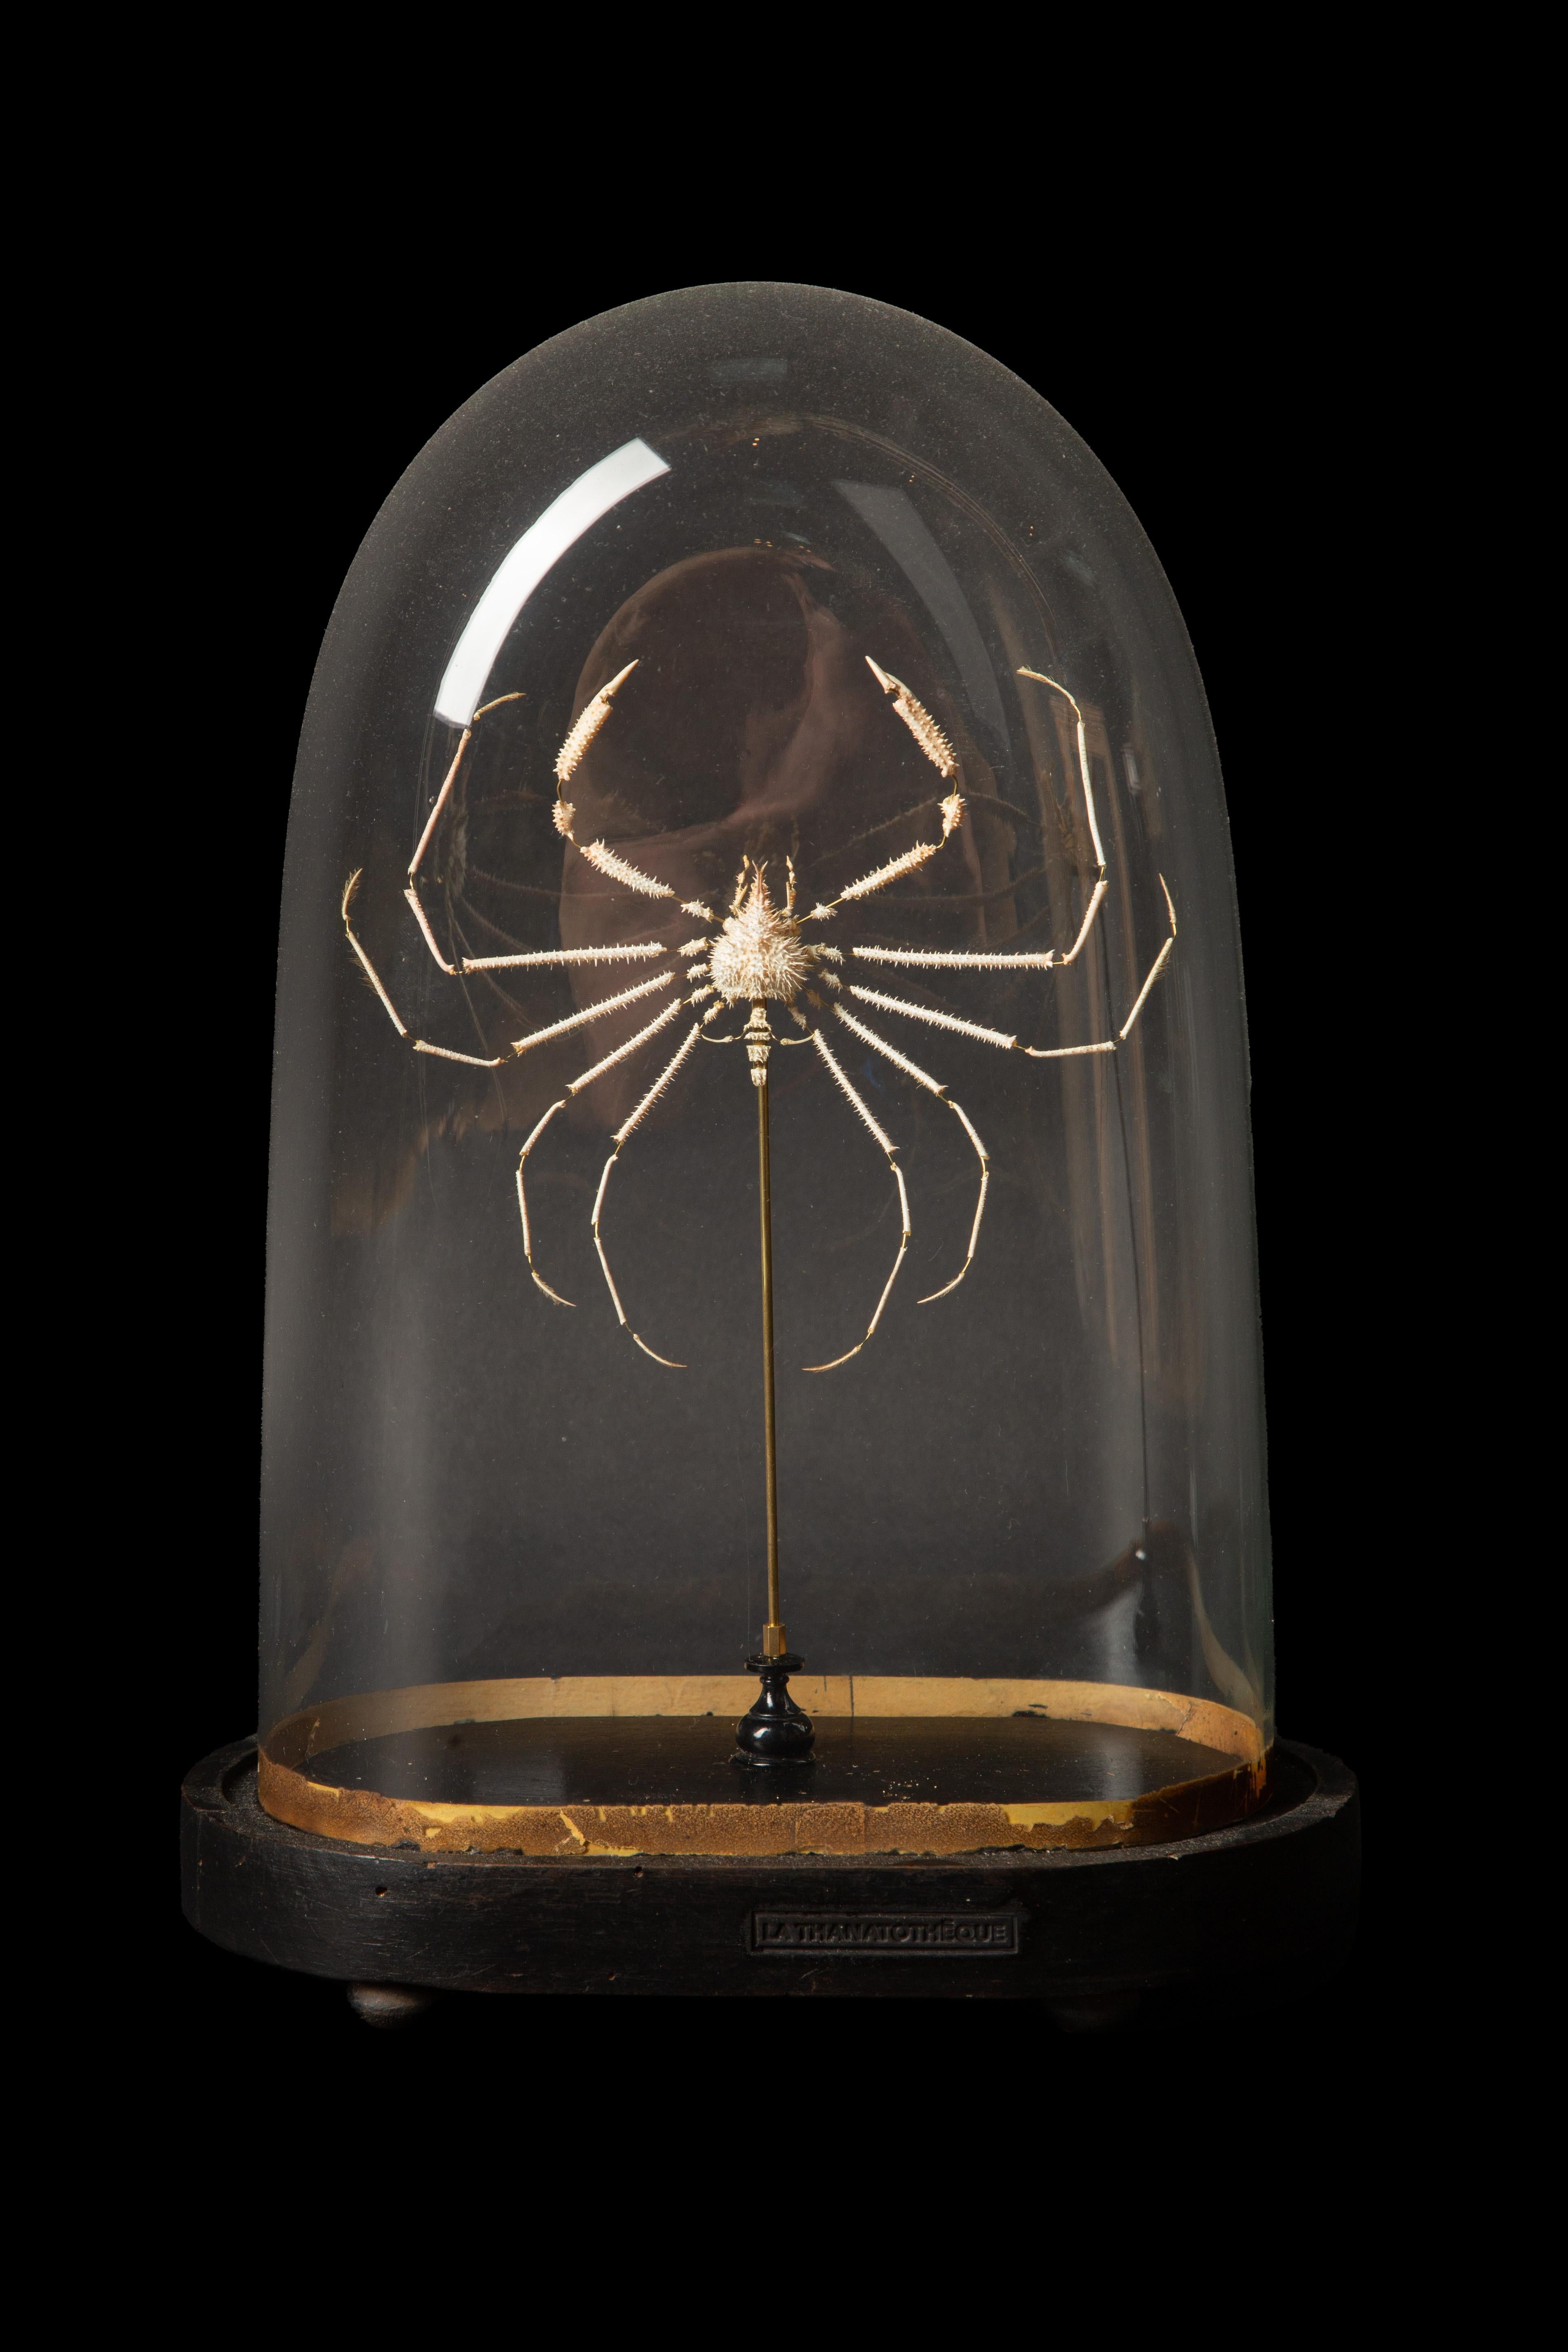 Very rare deep sea deconstructed Spider Crab (Pleistacantha moseleyi) Specimen under antique glass dome. 

The deconstruction technique invented by anatomist Edmé François Chauvot de Beachêne in France in the 19th century involves the meticulous